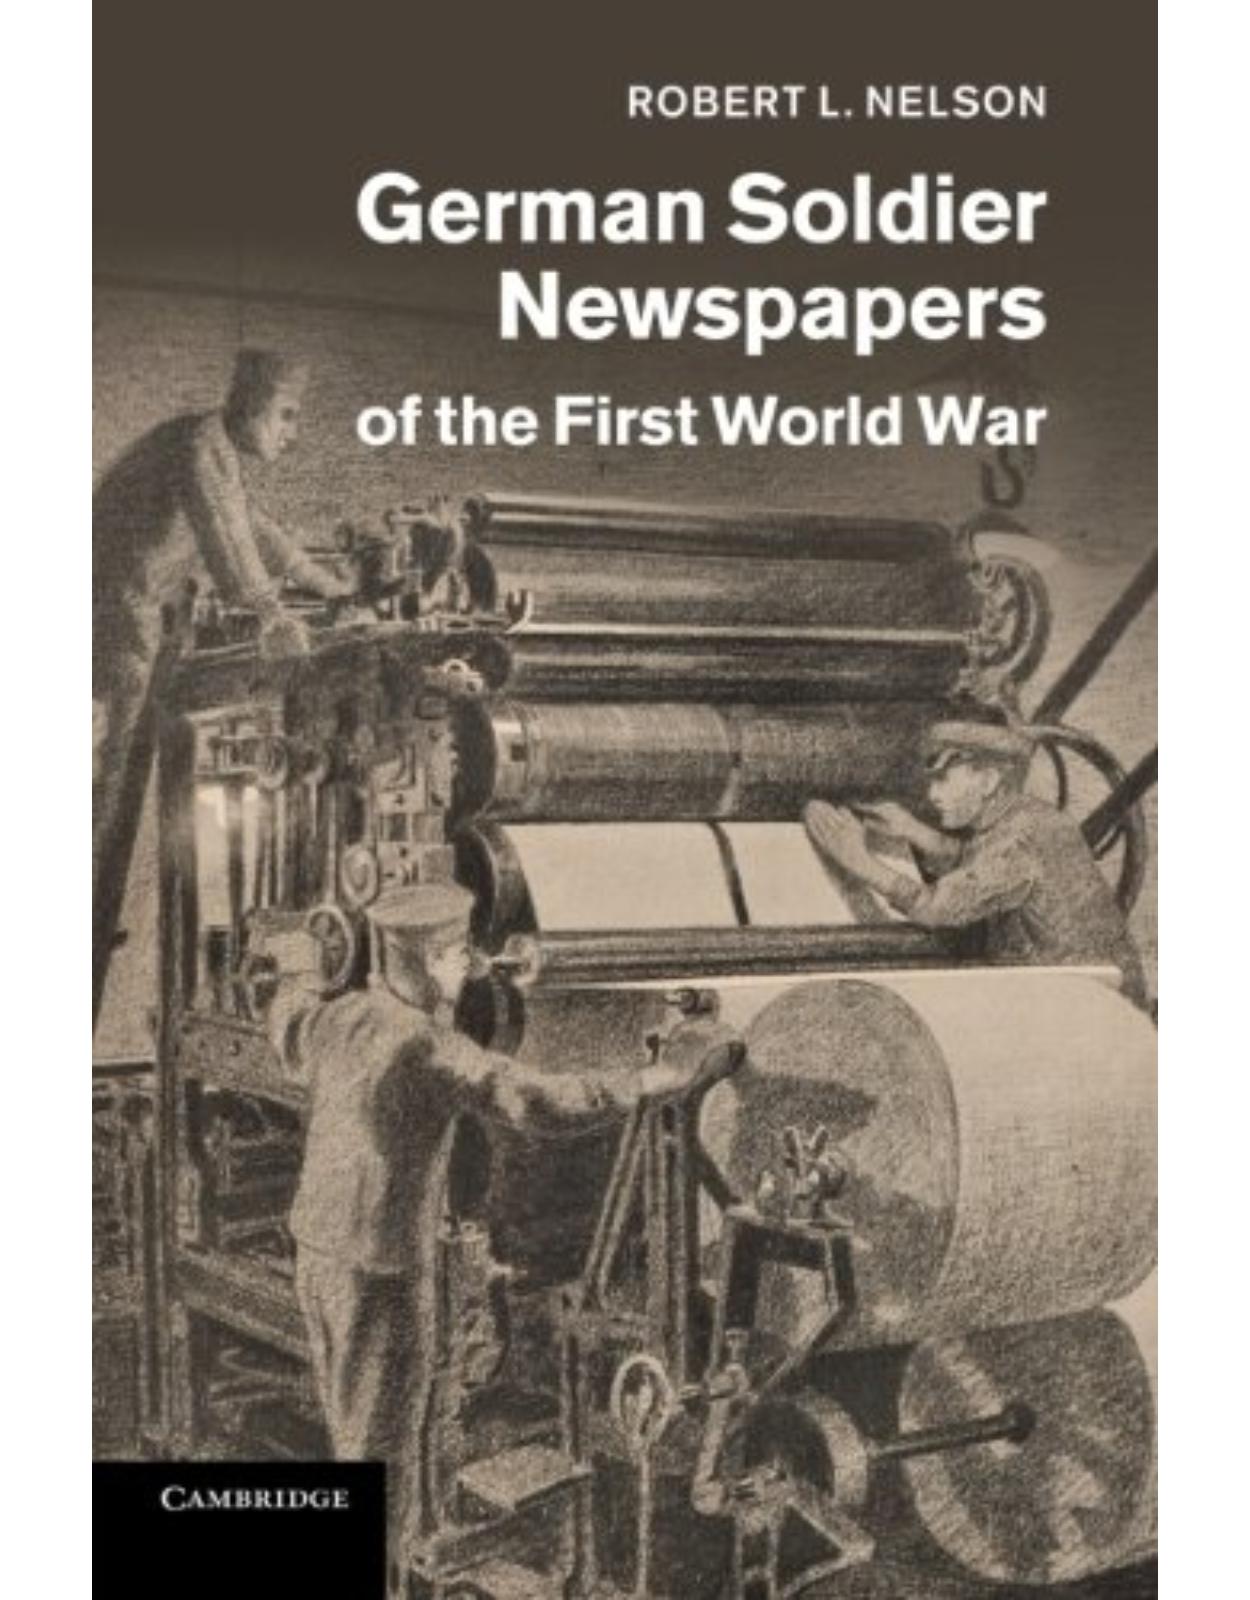 German Soldier Newspapers of the First World War (Studies in the Social and Cultural History of Modern Warfare)